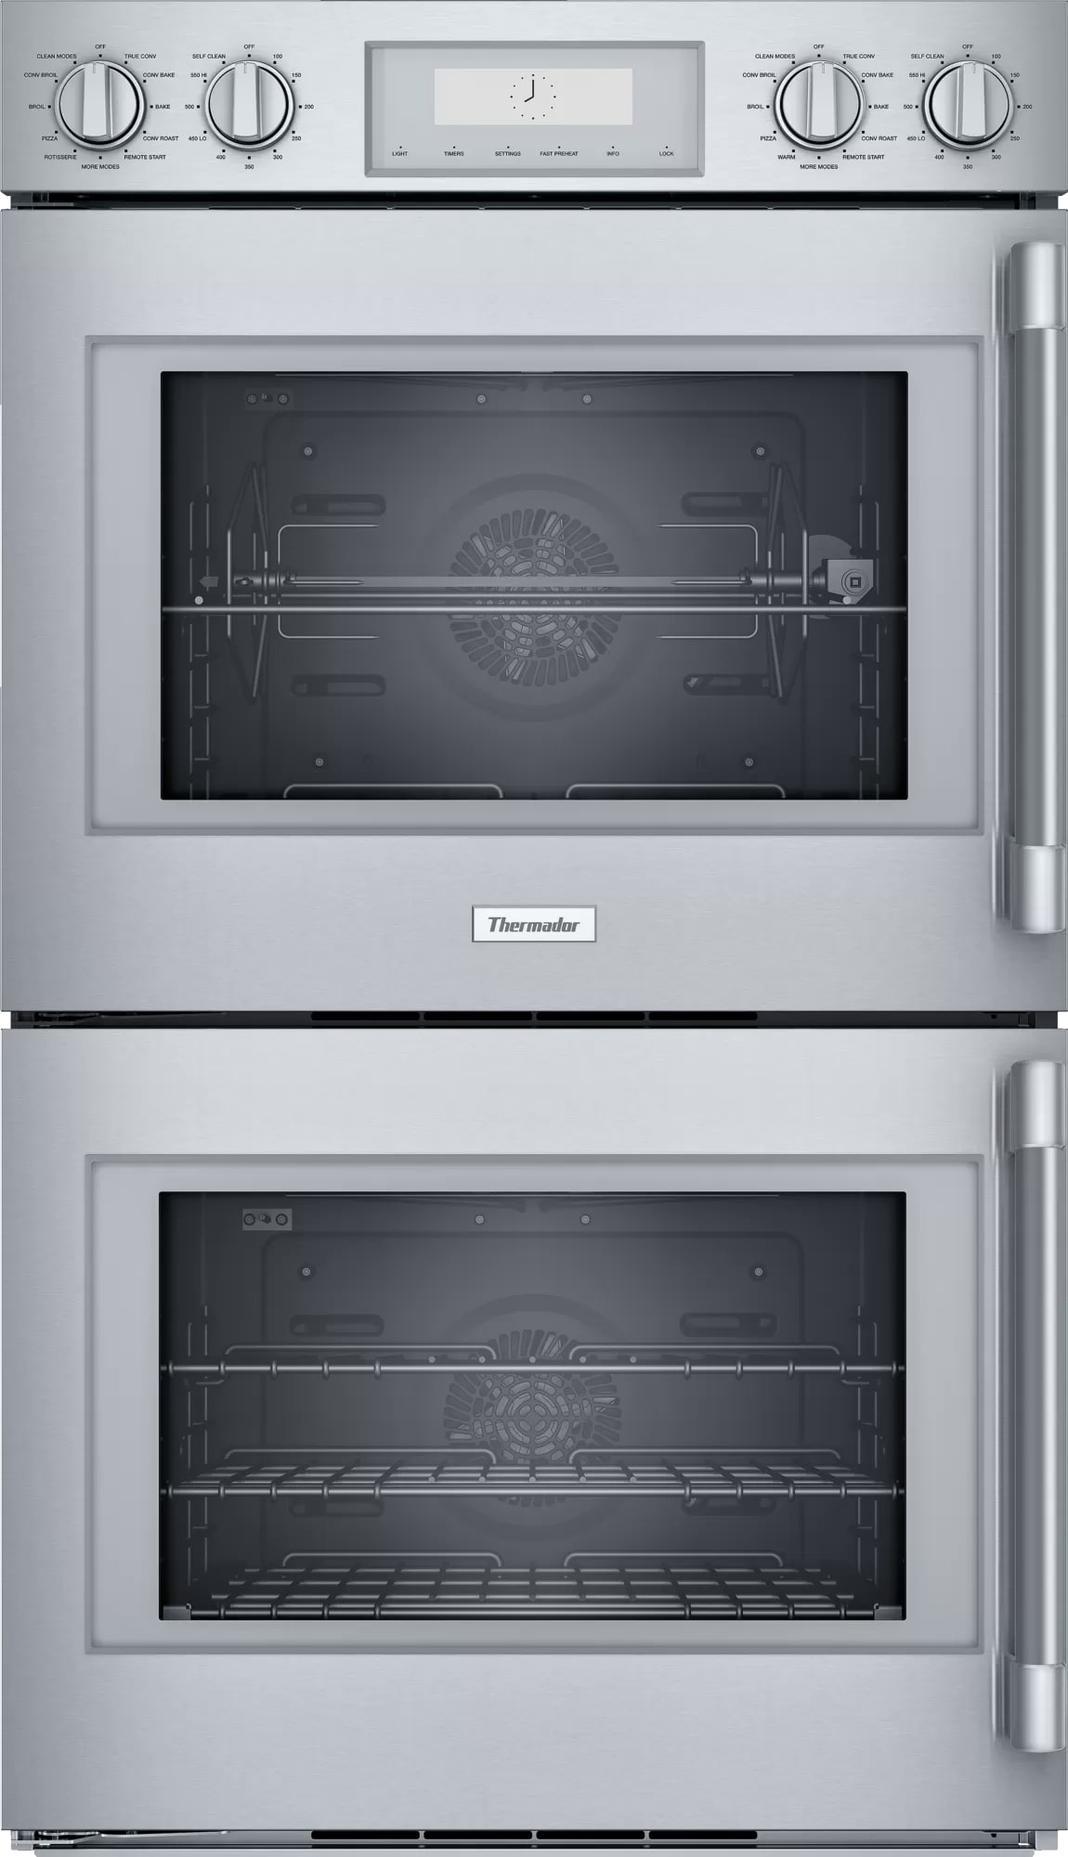 Thermador - 9 cu. ft Double Wall Oven in Stainless - POD302LW